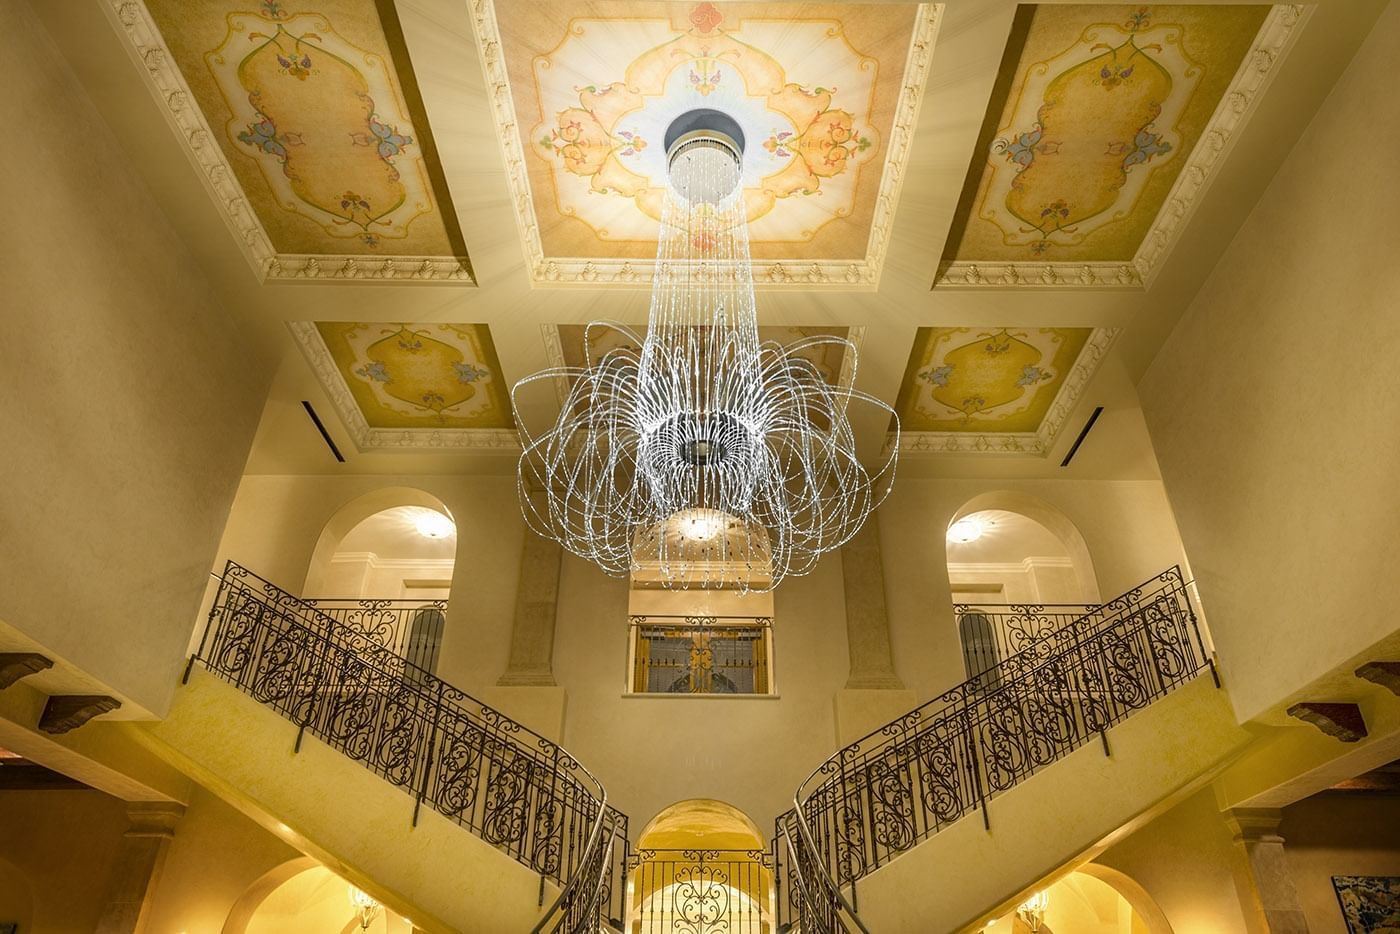 Allegretto's two story lobby with painted ceilings and split sta